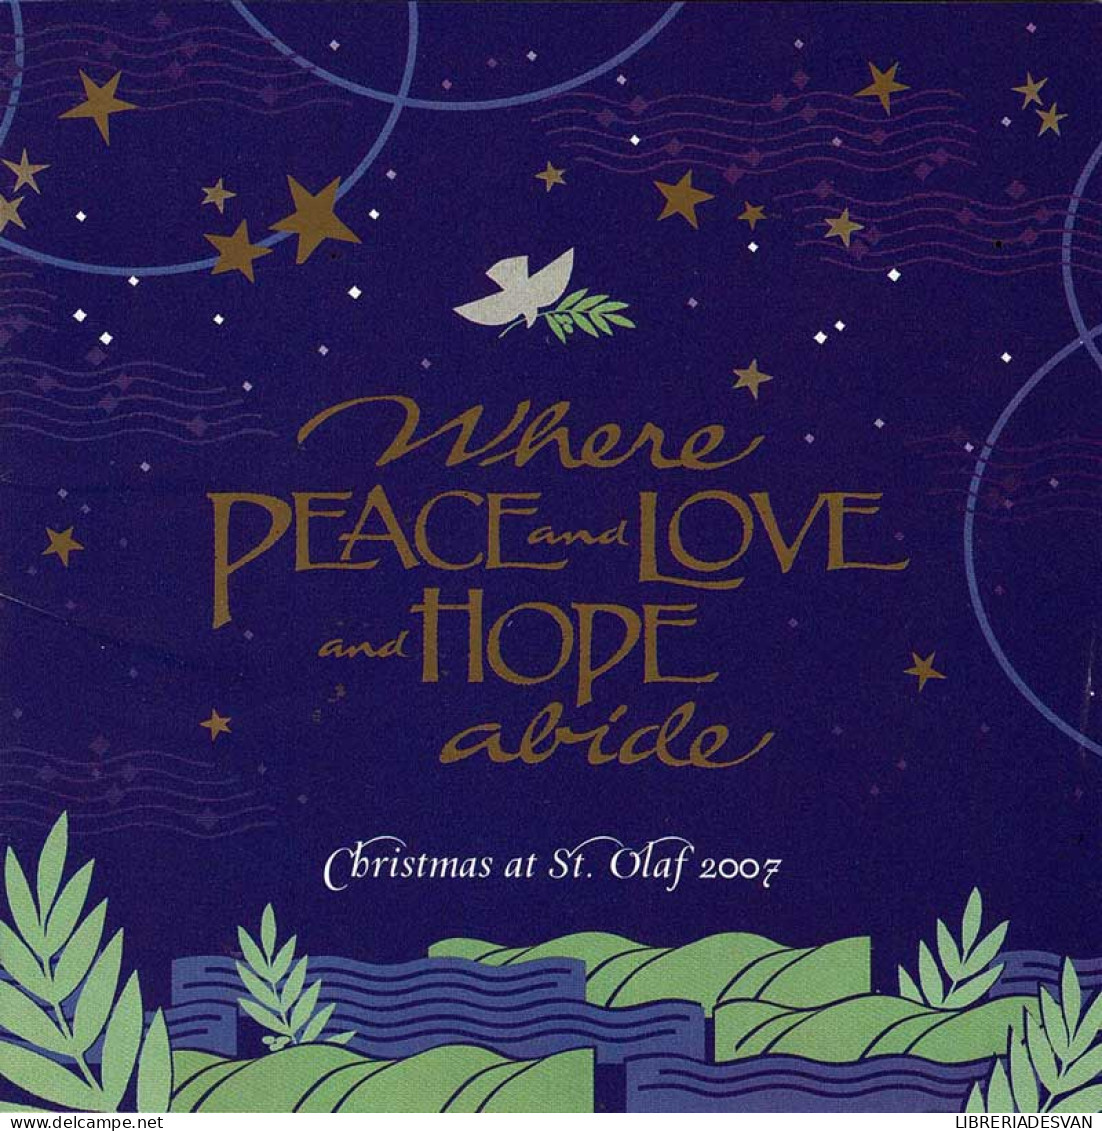 Christmas At St. Olaf 2007 - Where Peace And Love And Hope Abide. 2 X CD - Classica